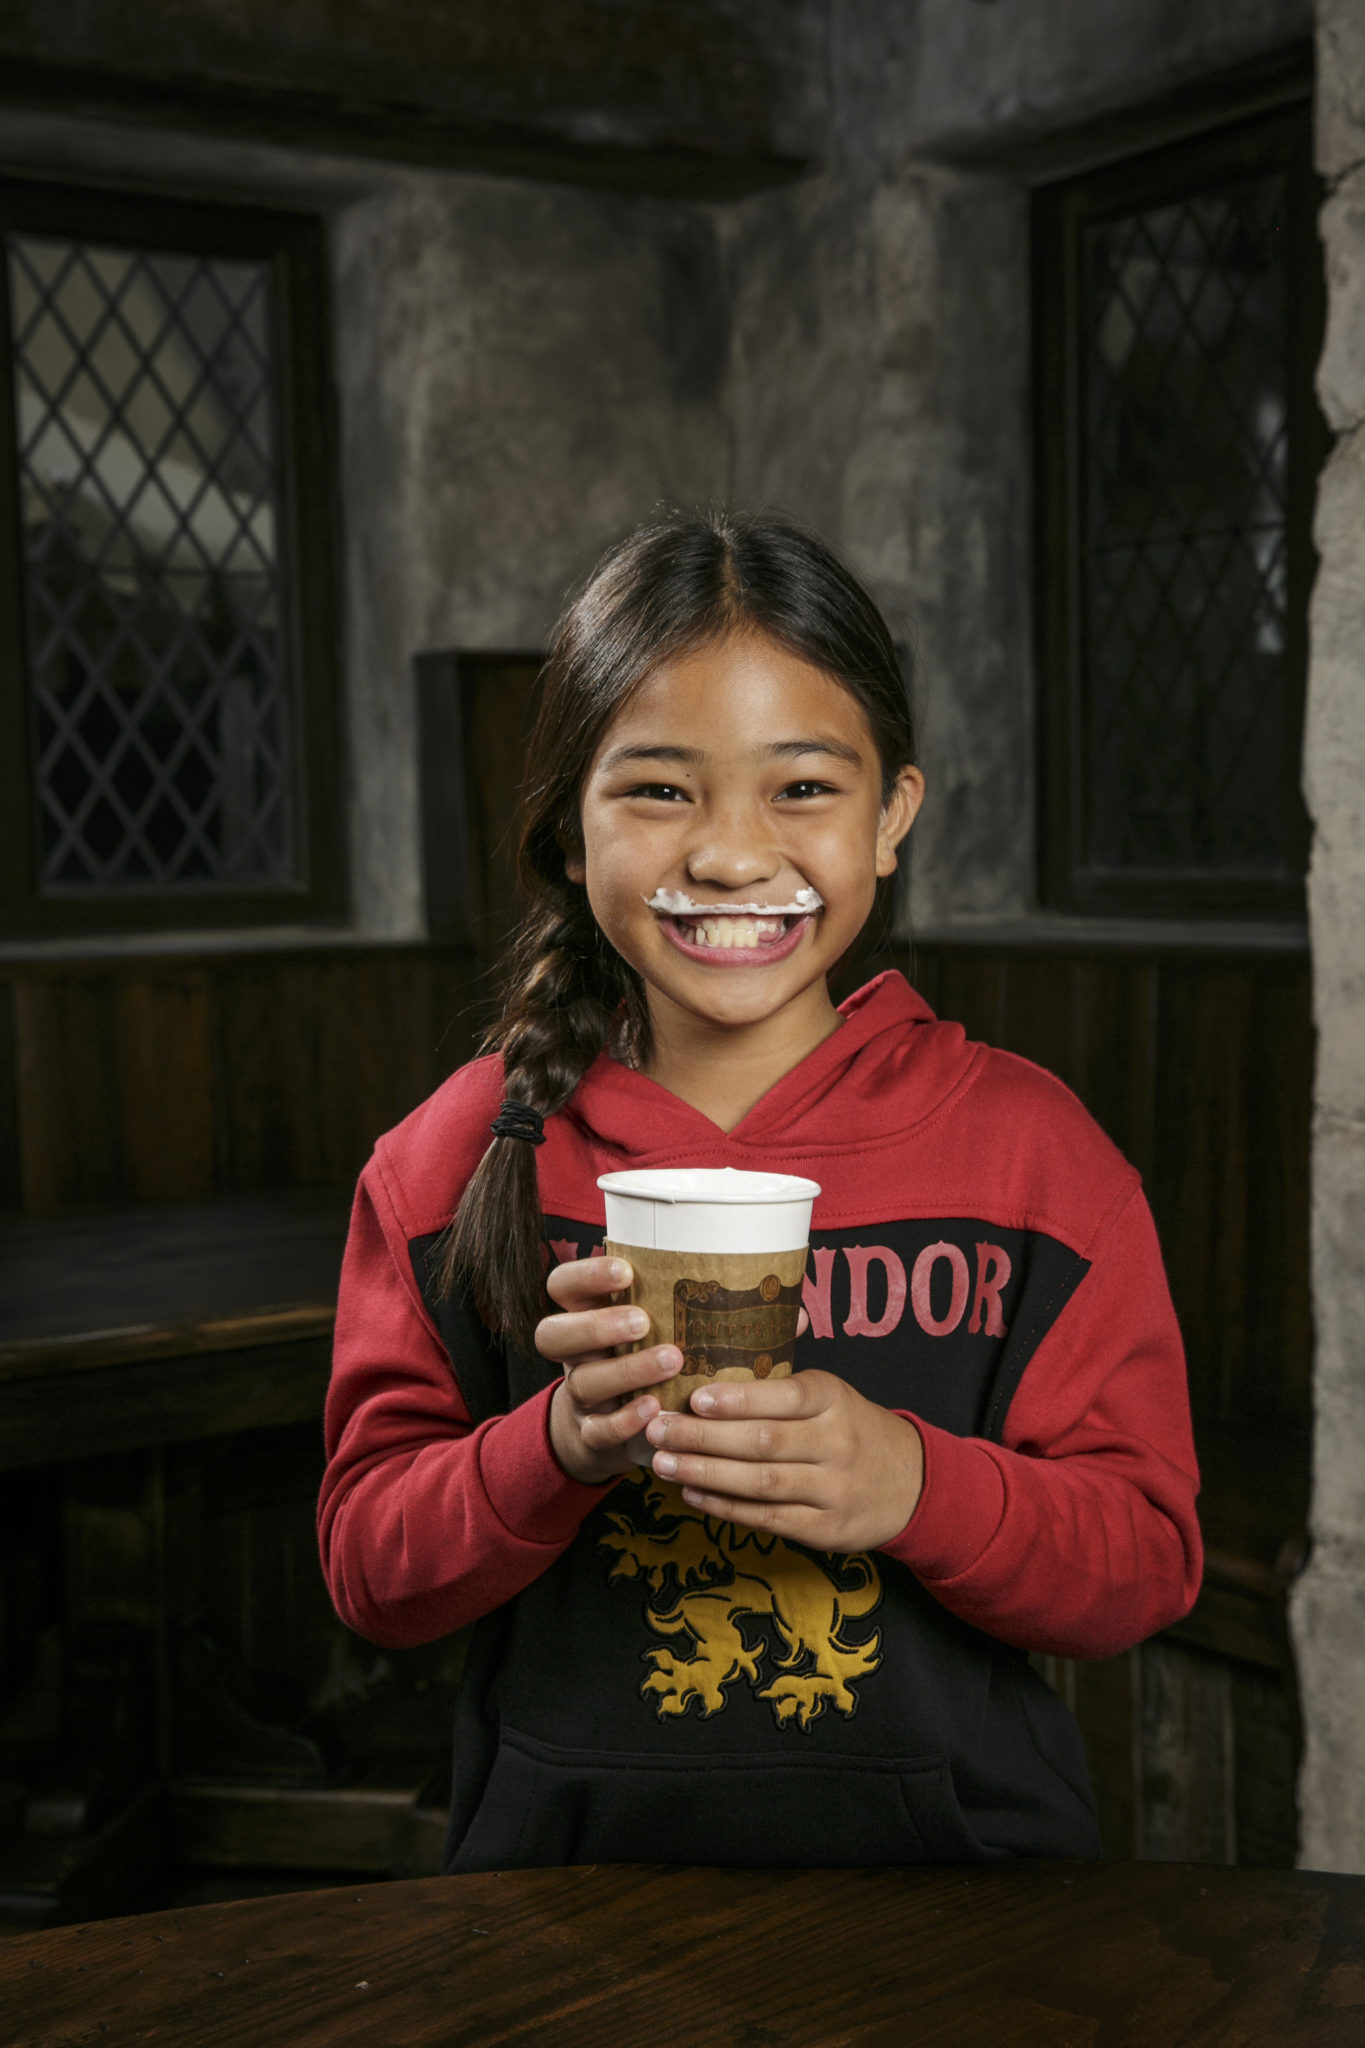 "The Wizarding World of Harry Potter" now serves hot Butterbeer at Three Broomsticks.